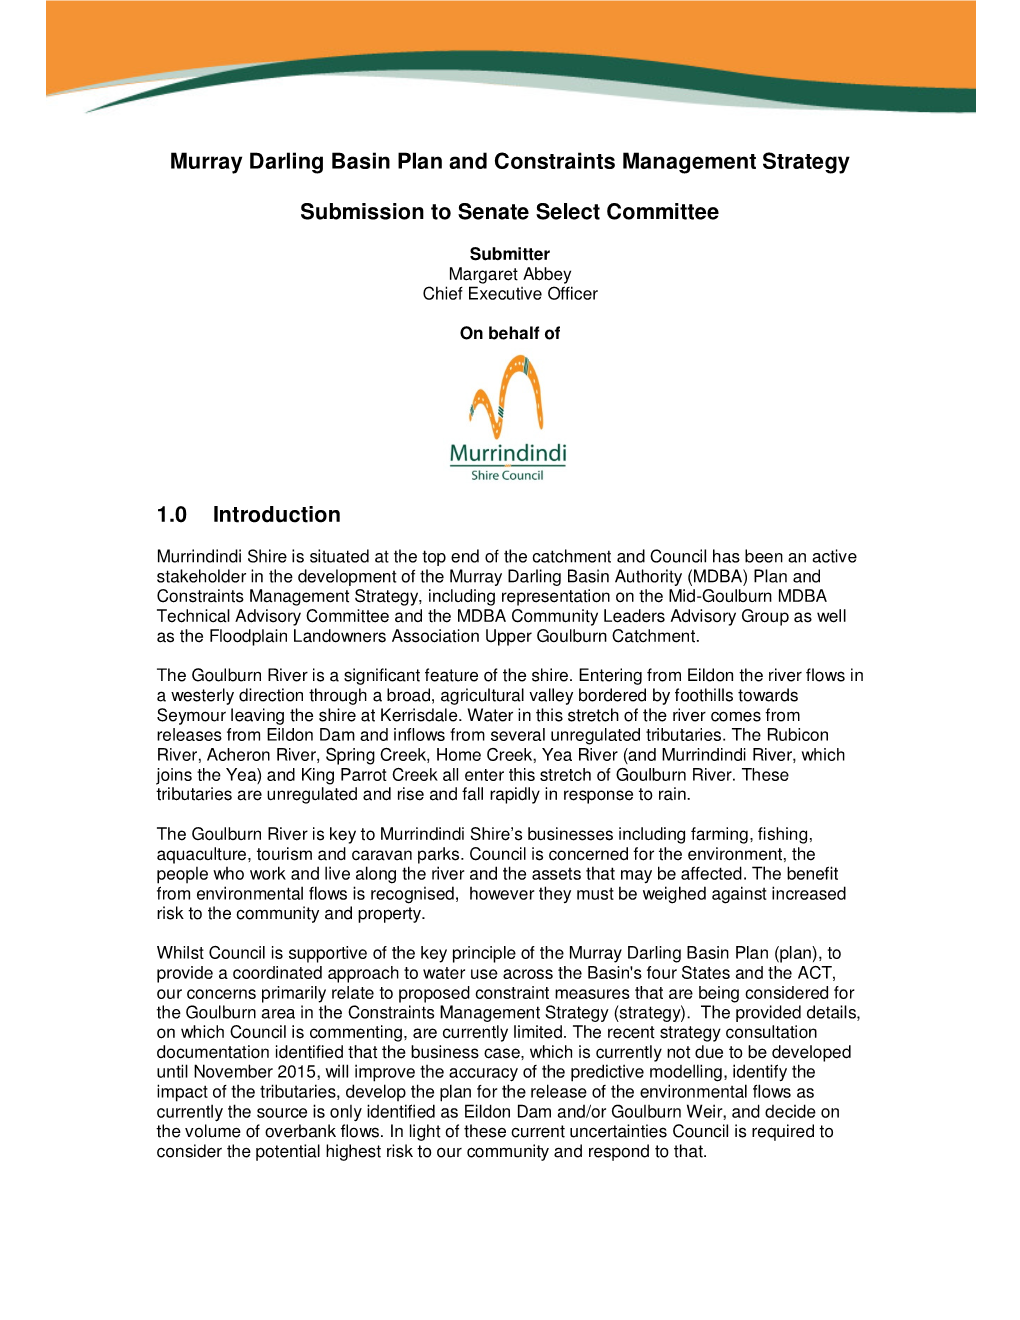 Murray Darling Basin Plan and Constraints Management Strategy